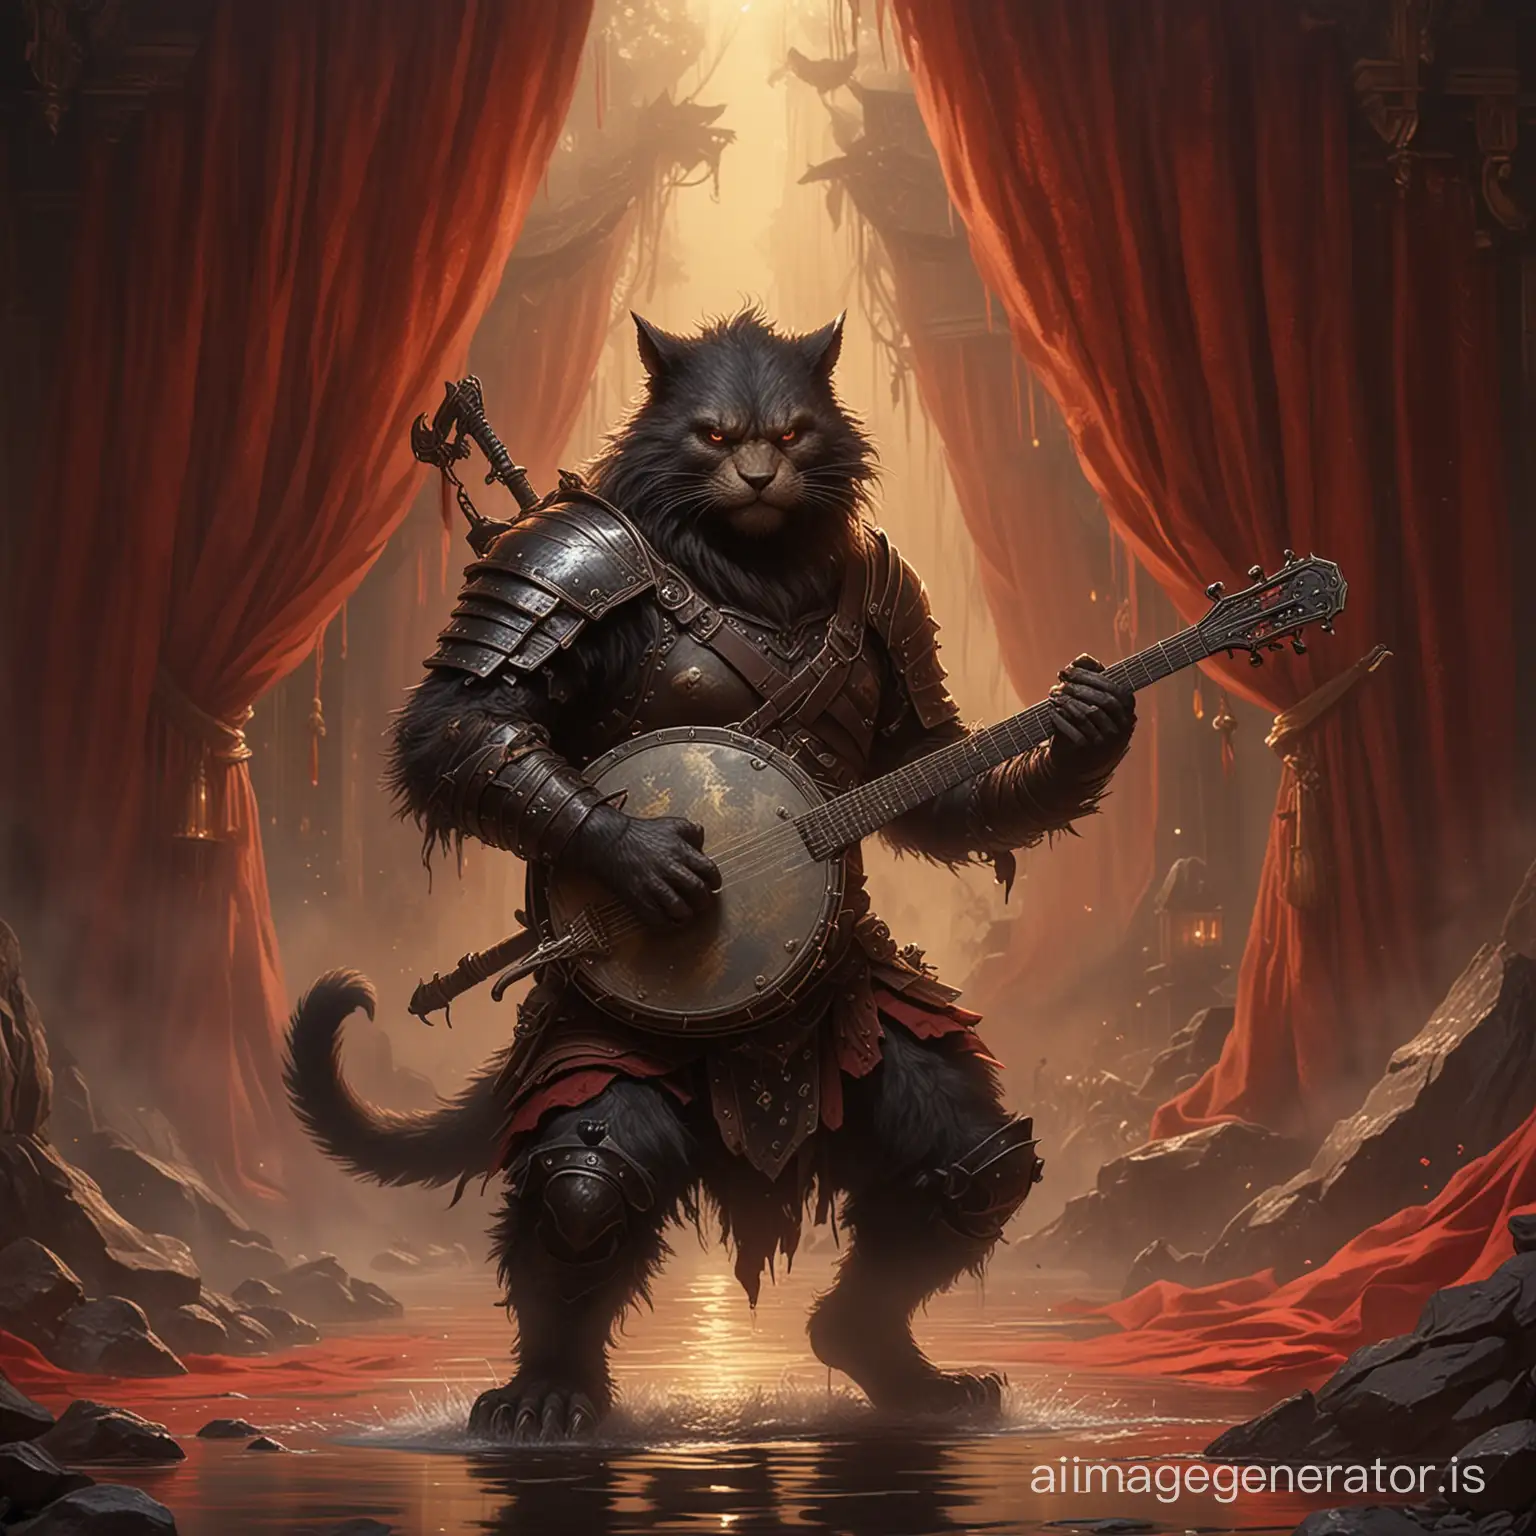 Ethereal-Bugbear-Warrior-with-Banjo-and-Hook-Sword-Amidst-Red-Curtains-and-Candlelight